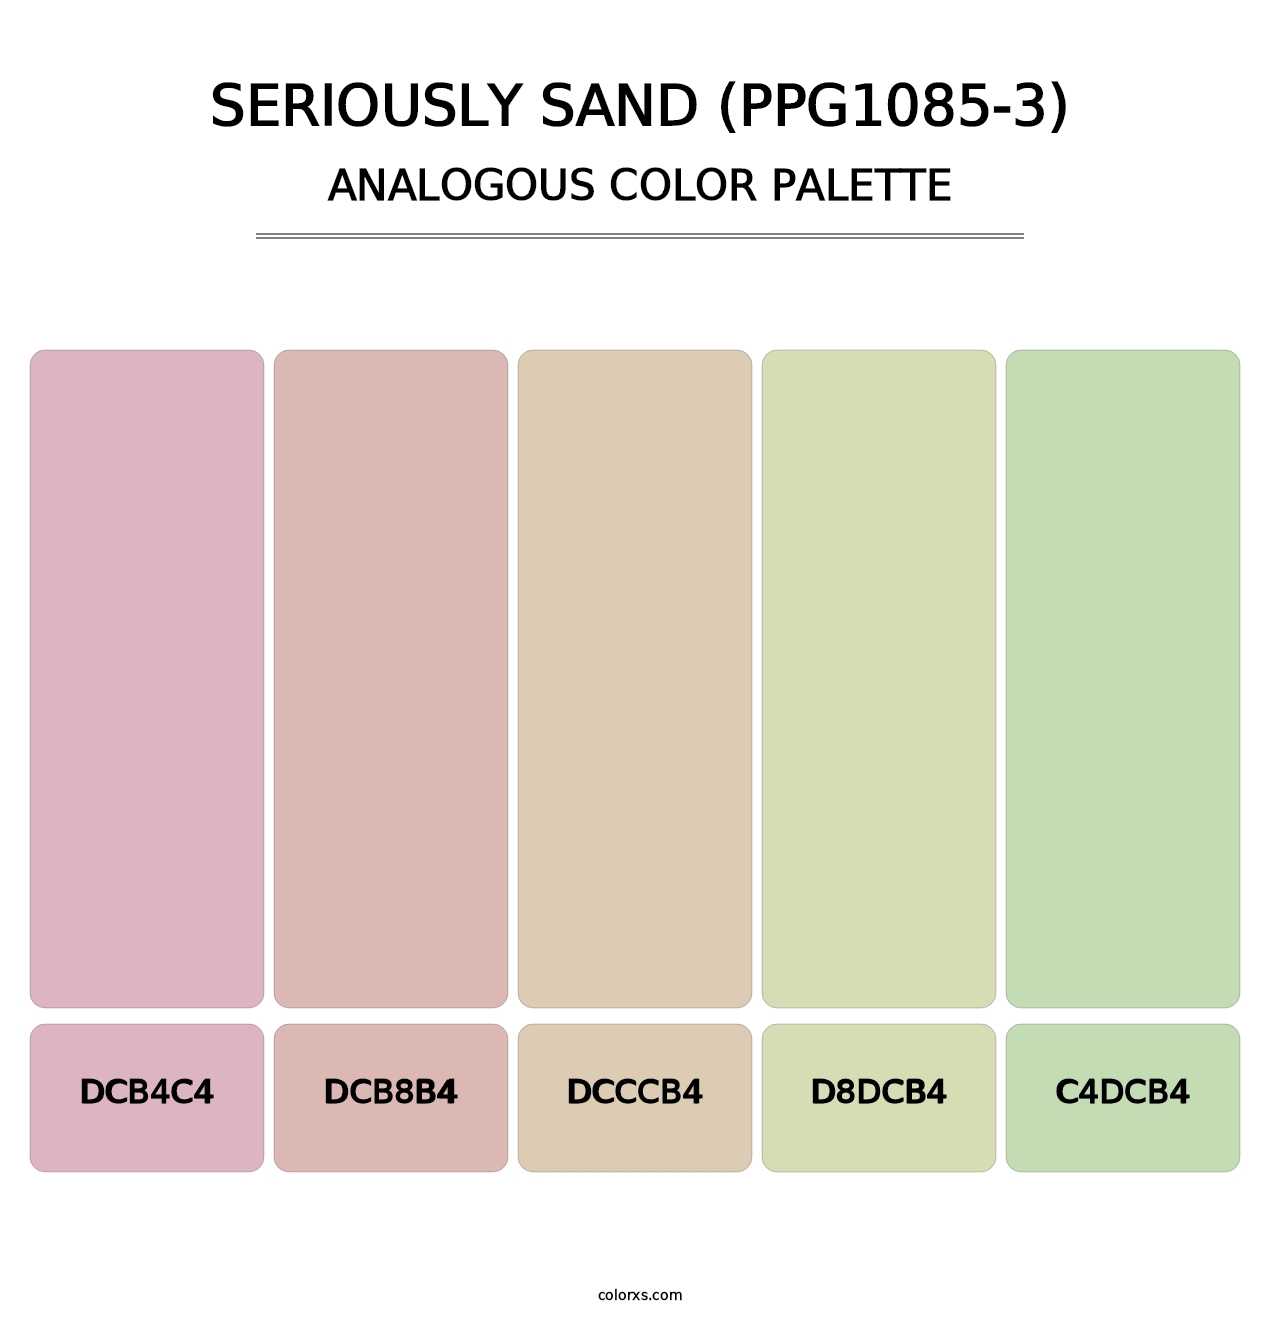 Seriously Sand (PPG1085-3) - Analogous Color Palette